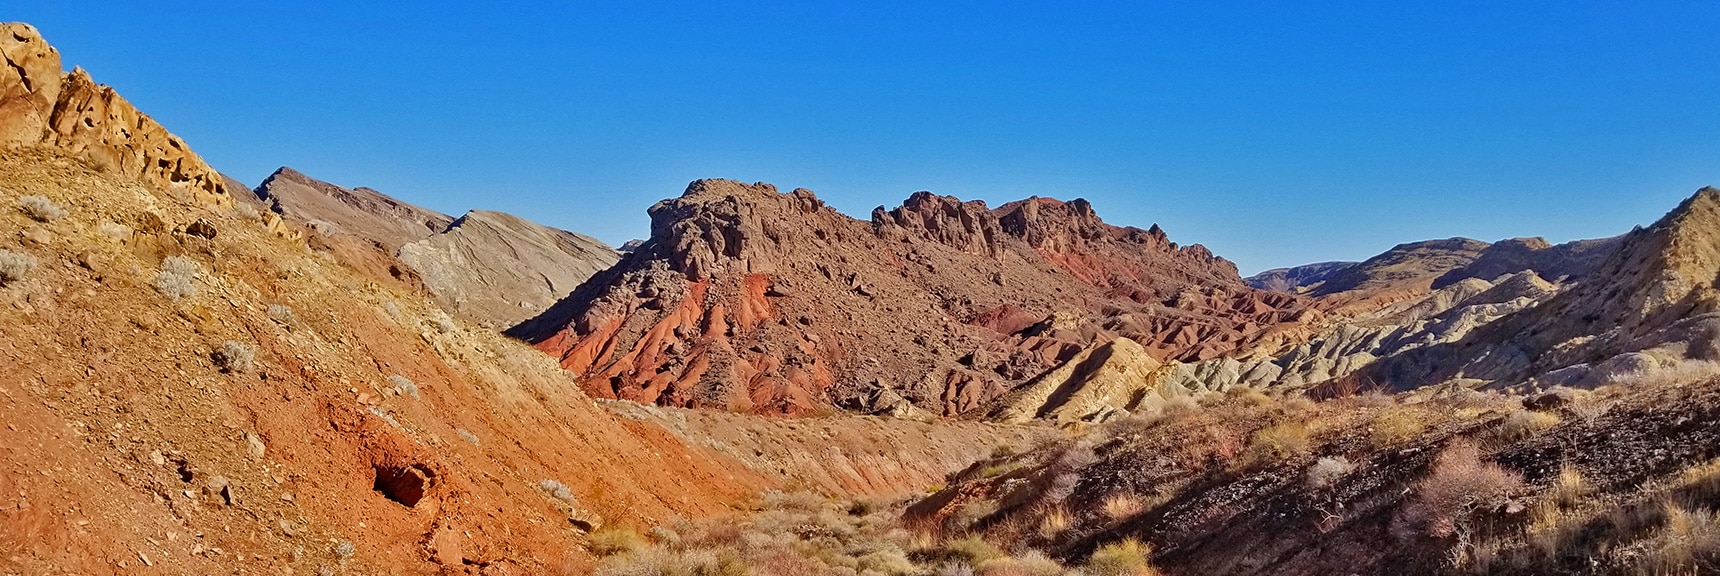 Rugged Terrain in the Hamblin Mt. Area Formed by Water's Action | Hamblin Mountain, Lake Mead National Conservation Area, Nevada